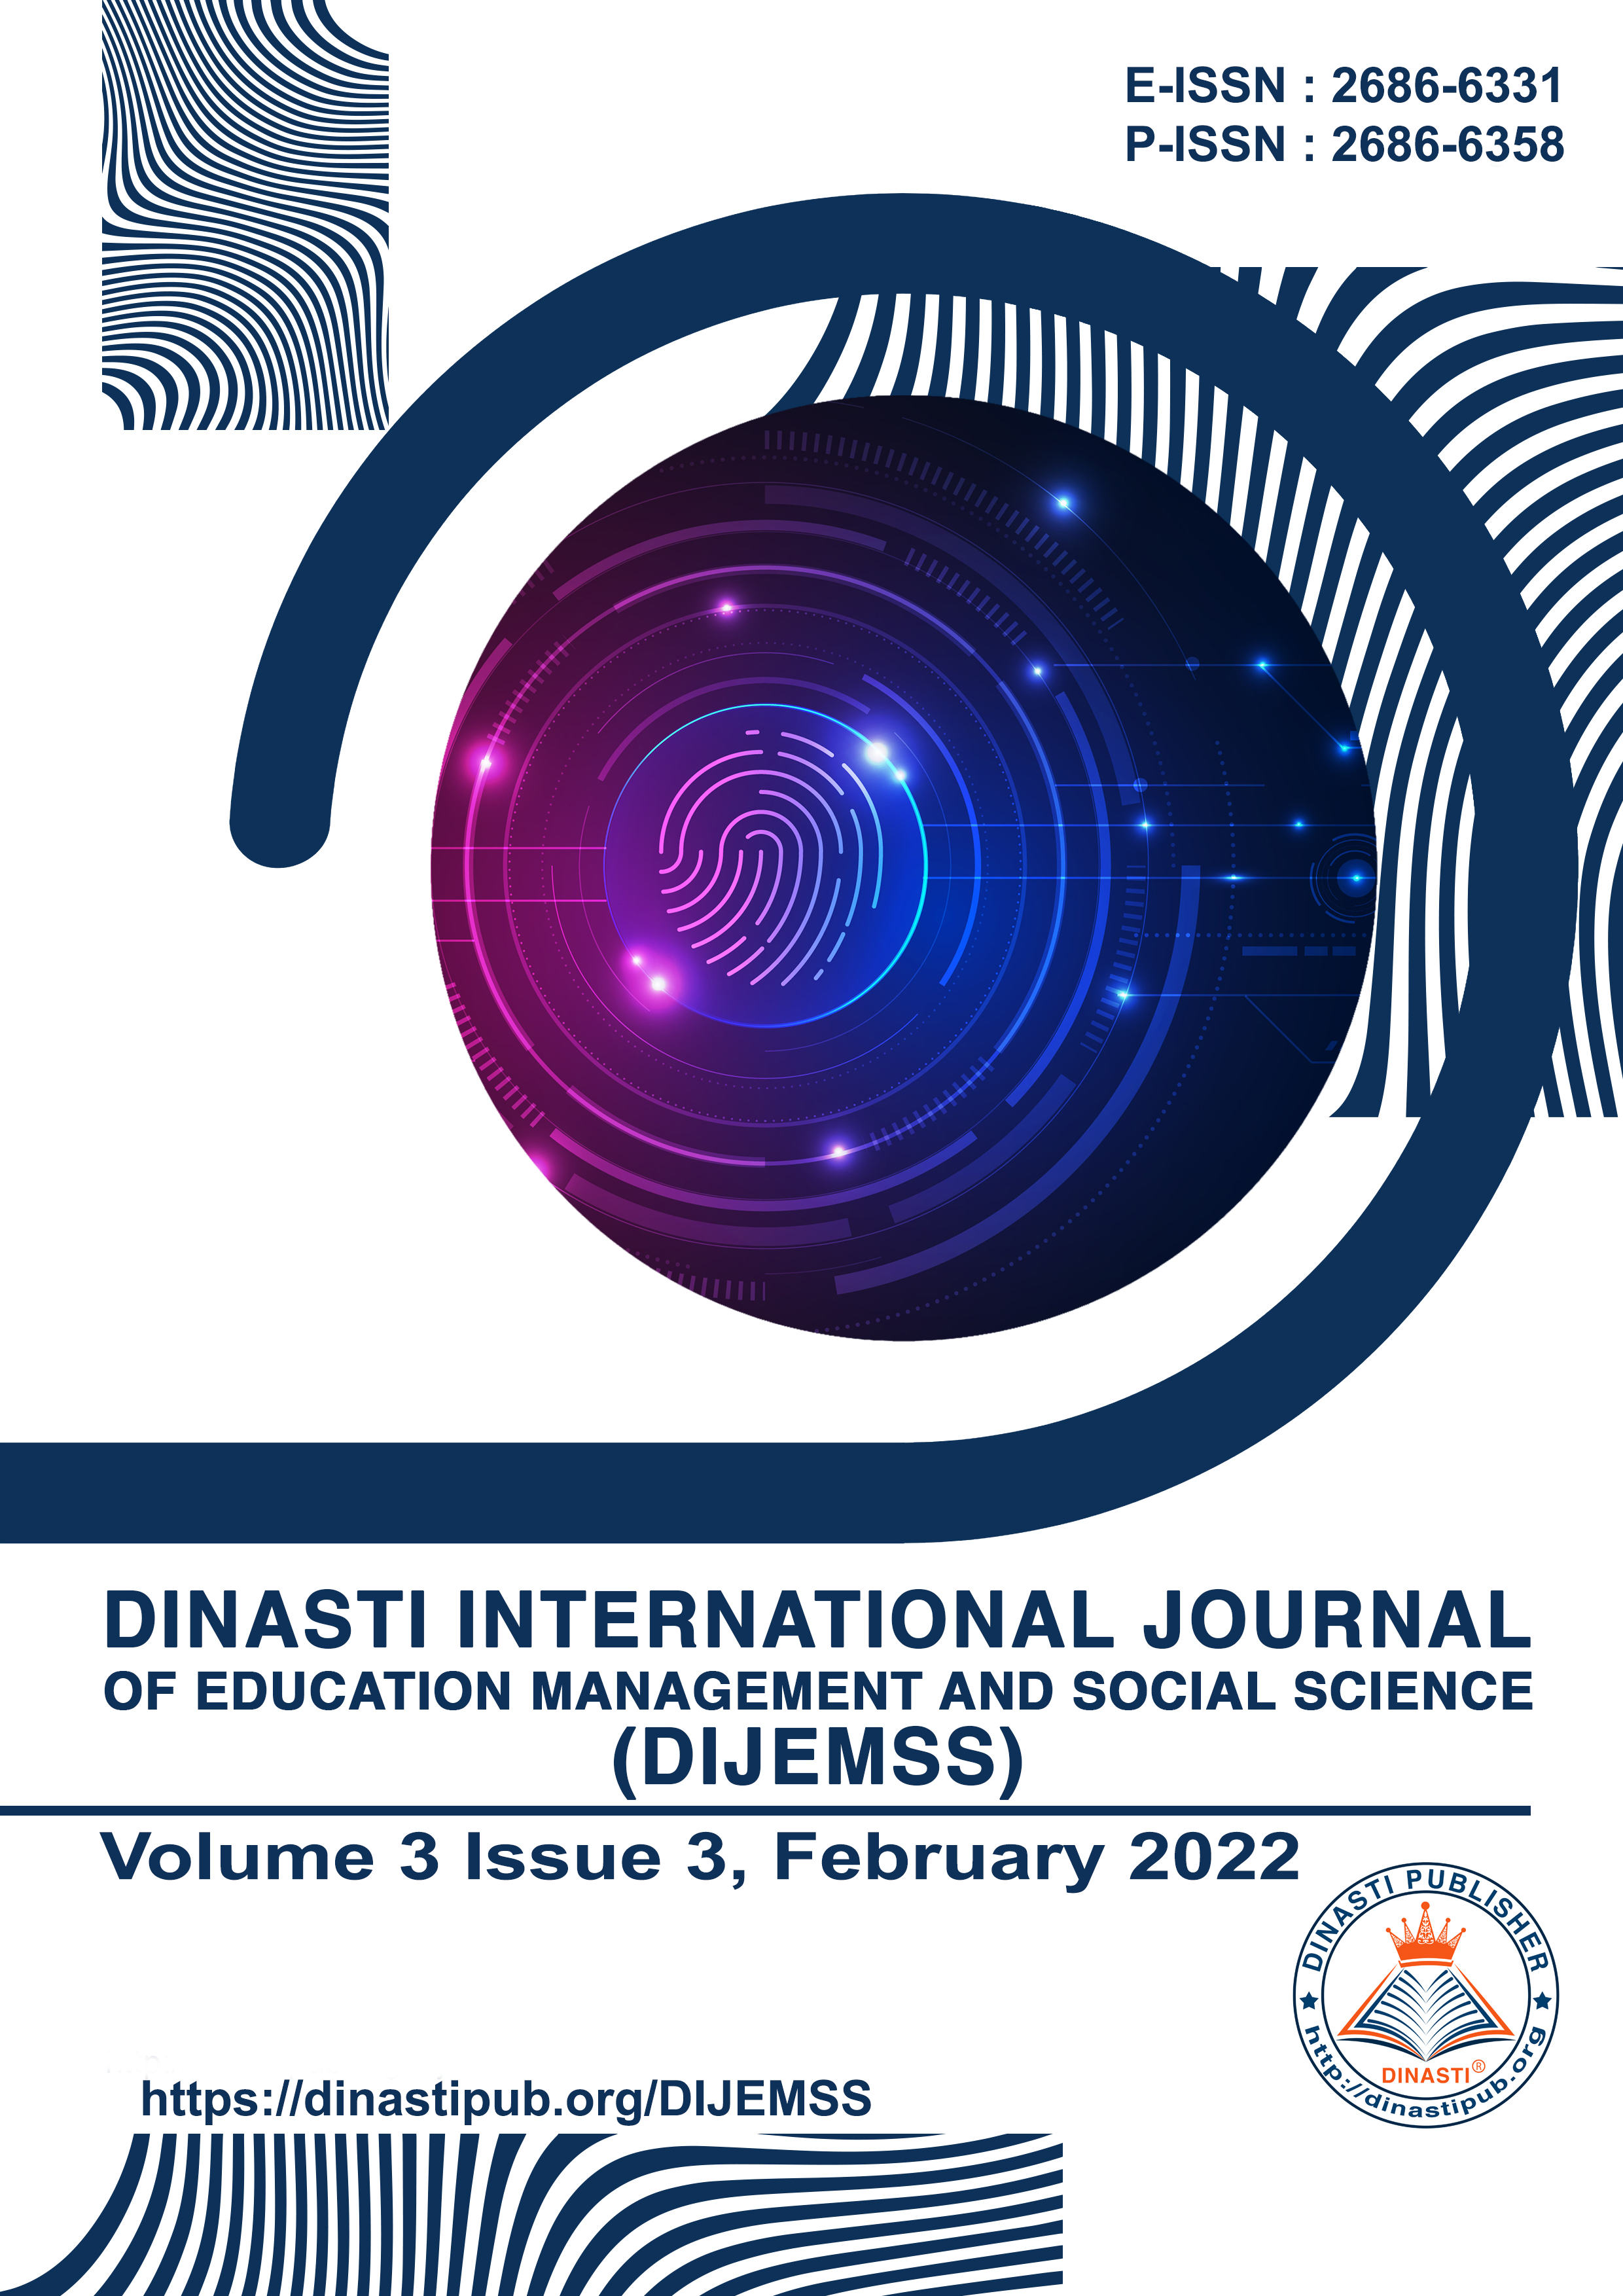 					View Vol. 3 No. 3 (2022): Dinasti International Journal of Education Management and Social Science (February - March 2022)
				